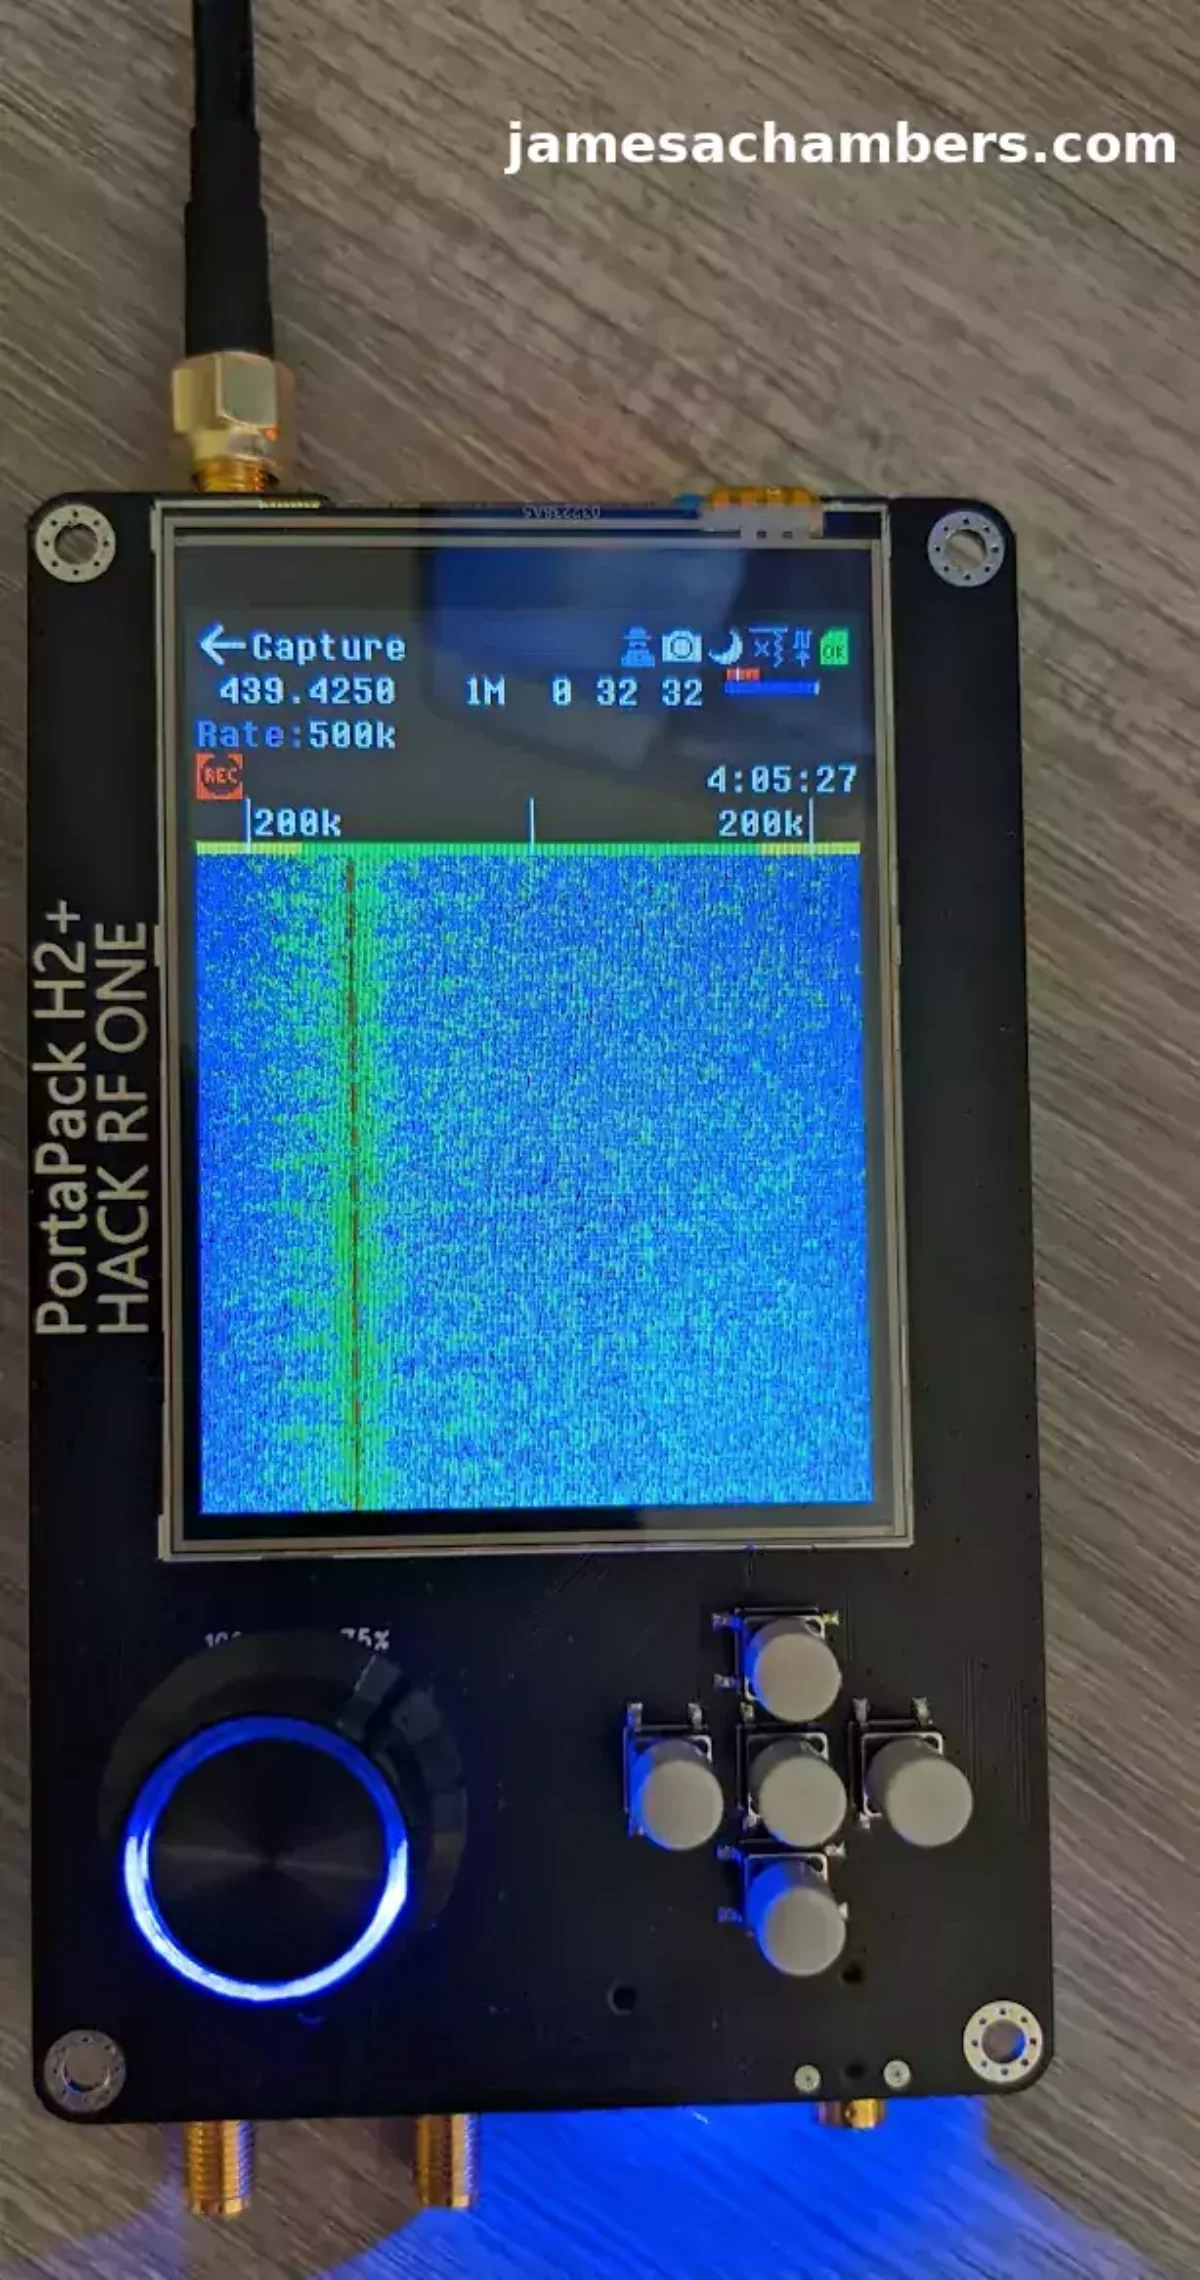 Upgrading HackRF One to PortaPack H2 - James A. Chambers